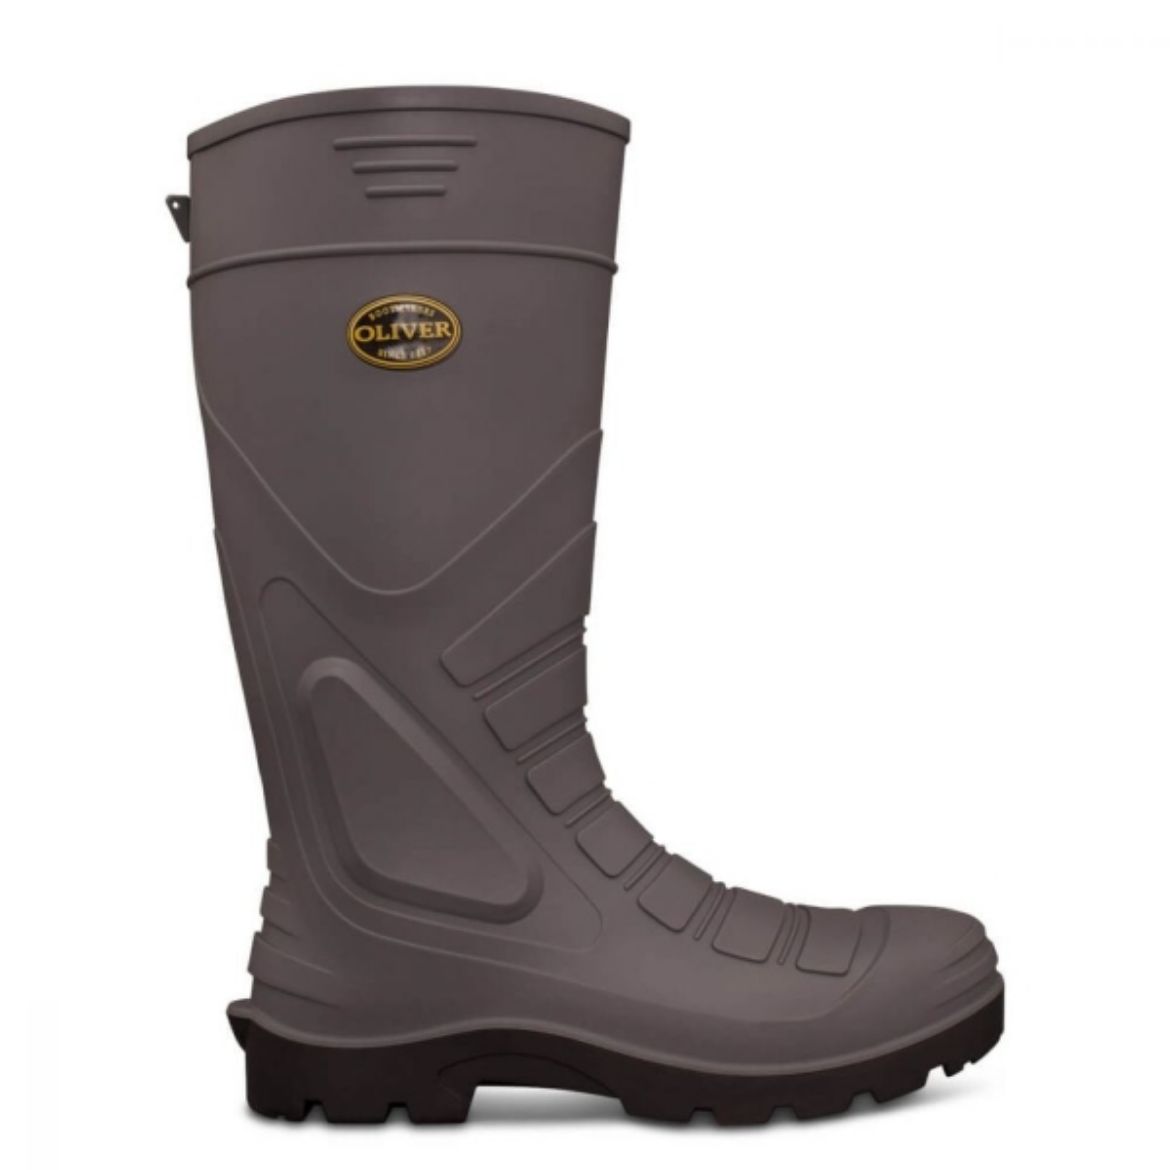 Picture of PVC WATERPROOF SAFETY GUMBOOT, METPROTECT™ METATARSAL PROTECTION, STEEL
MIDSOLE PENETRATION PROTECTION.